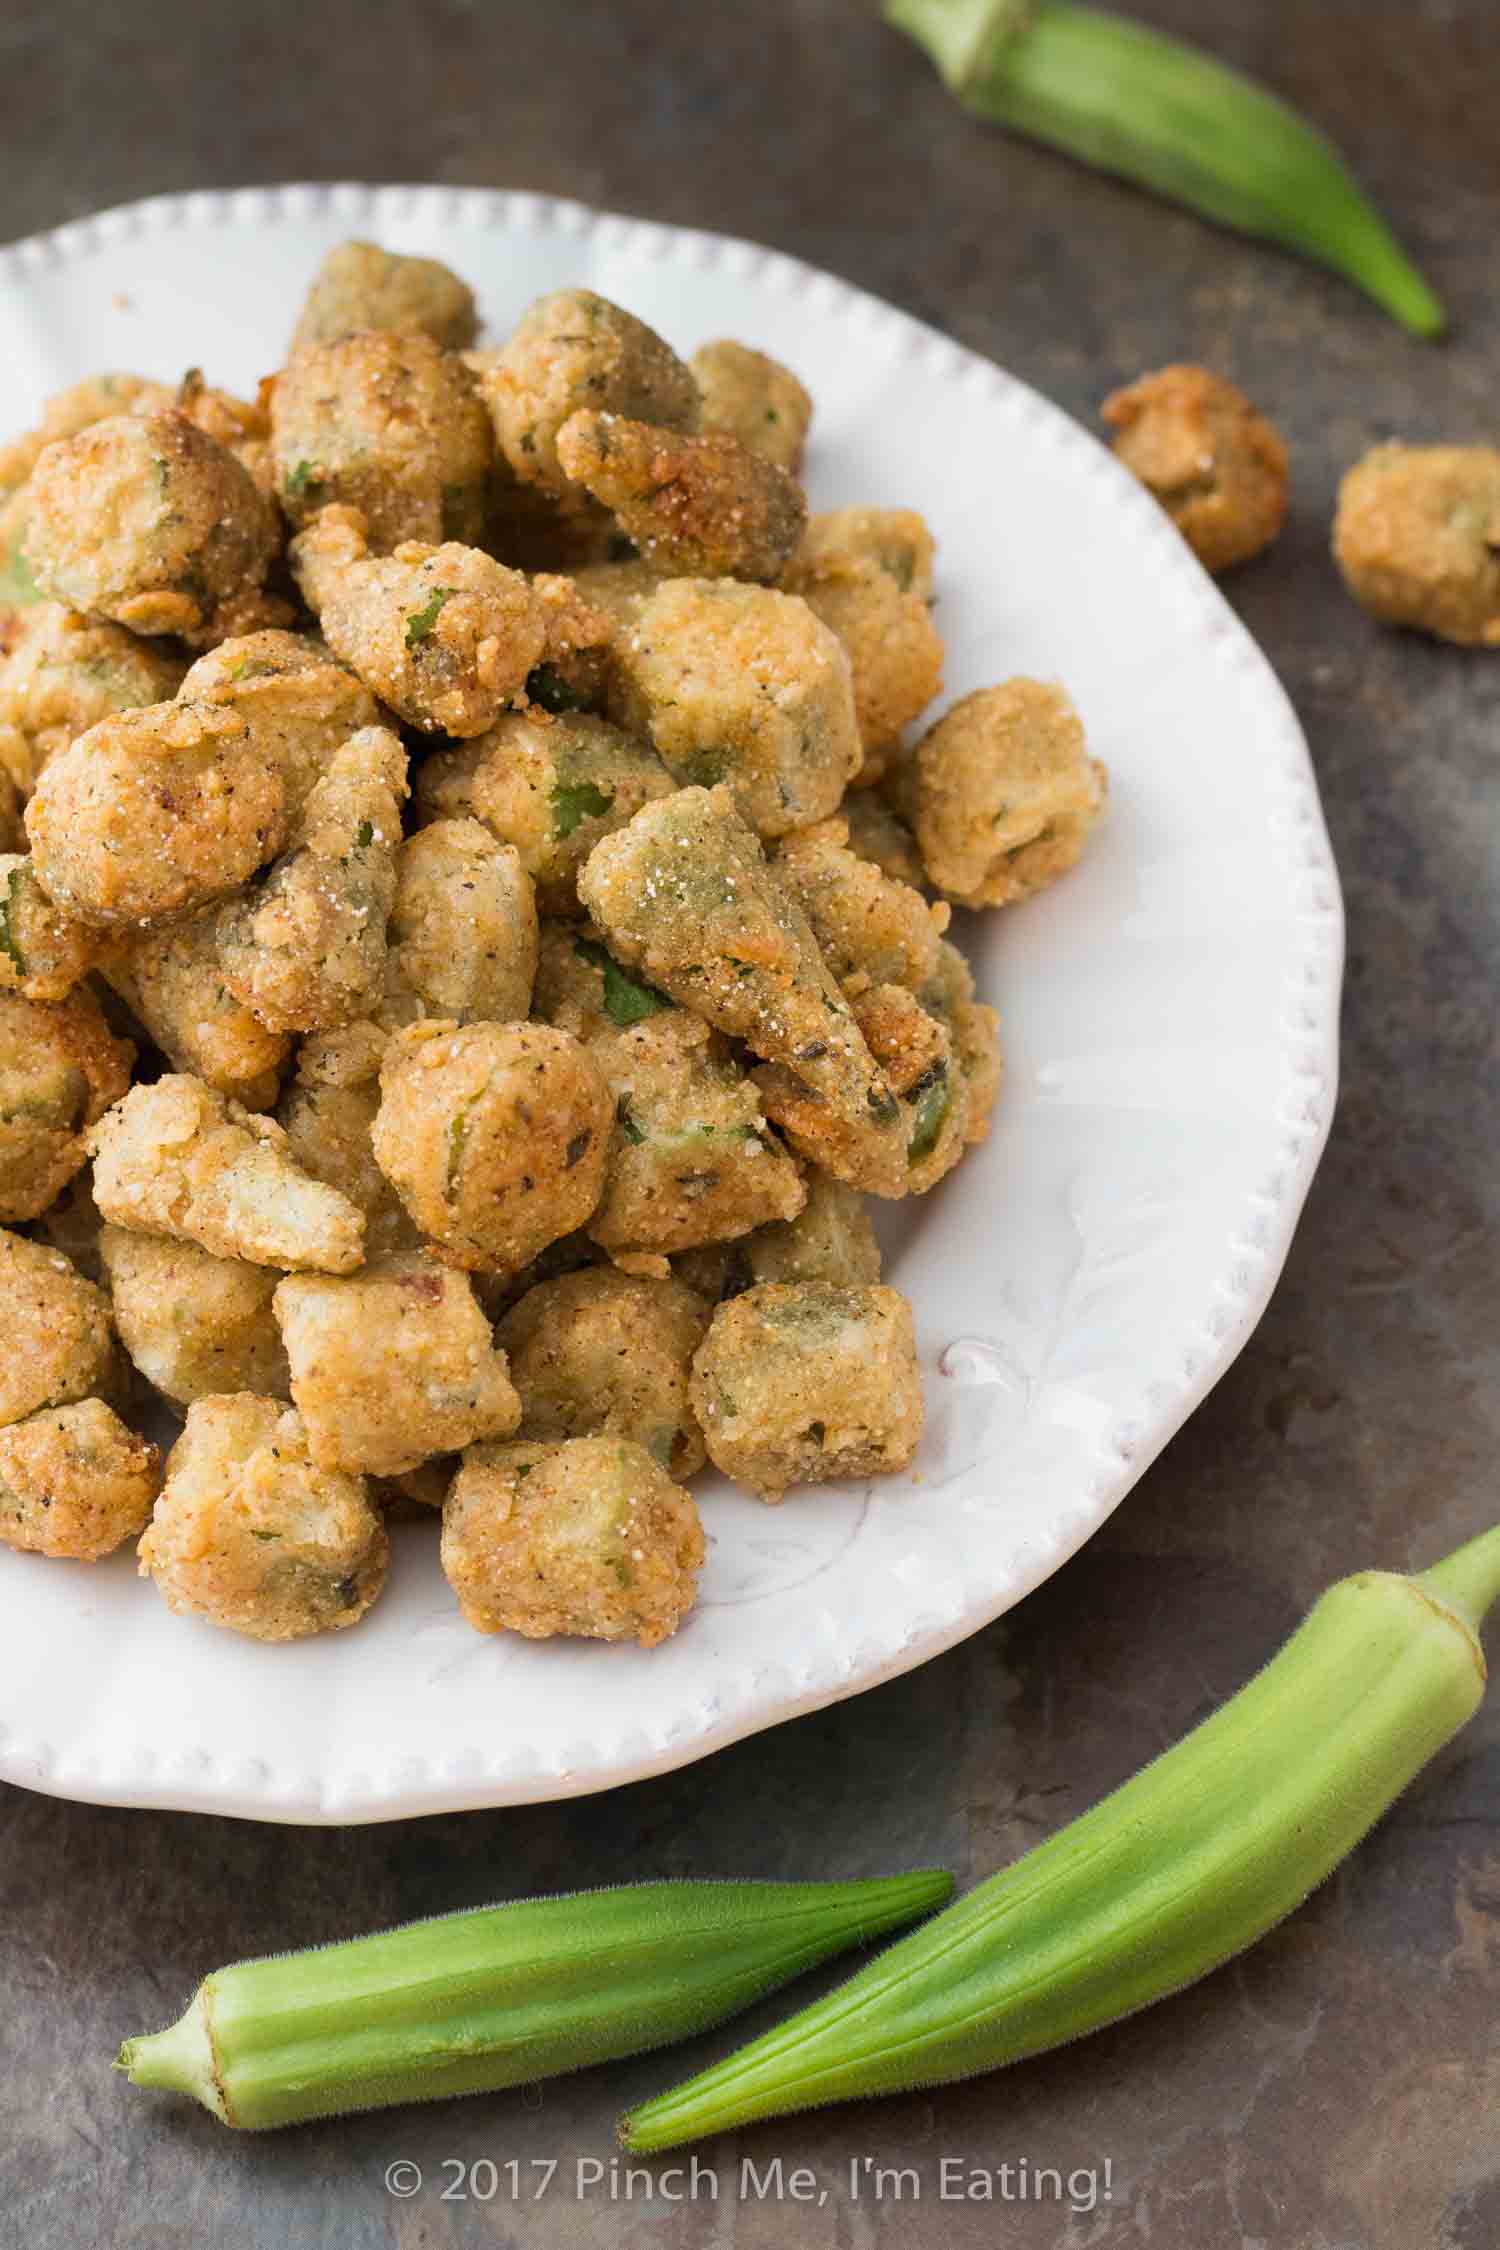 Classic Southern Fried Okra with Cornmeal